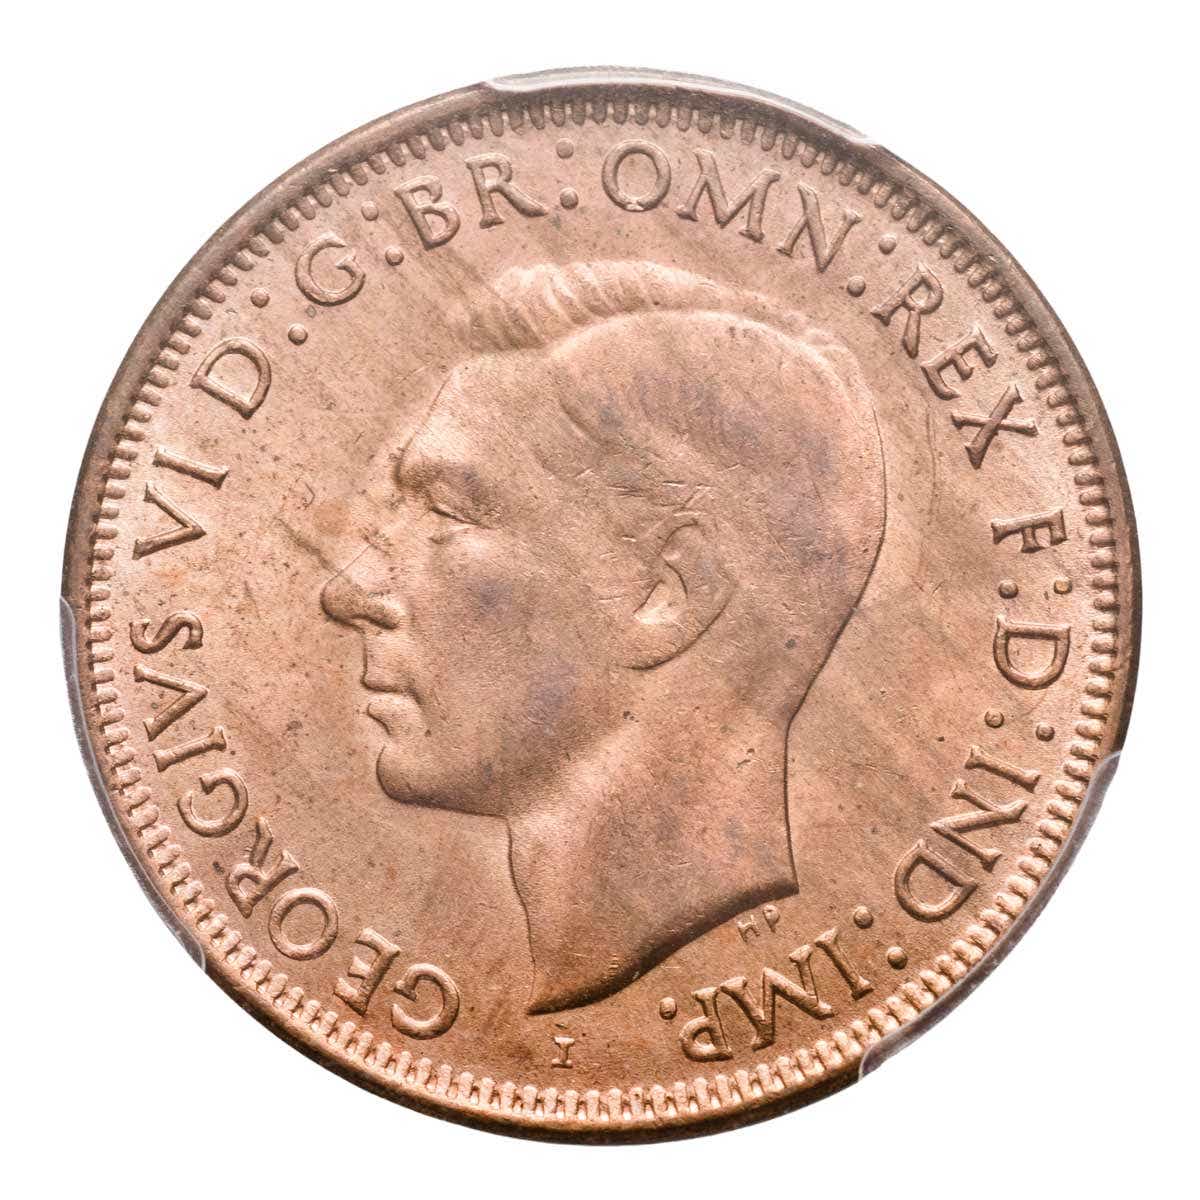 1943I Penny PCGS MS64RB (Choice Uncirculated)